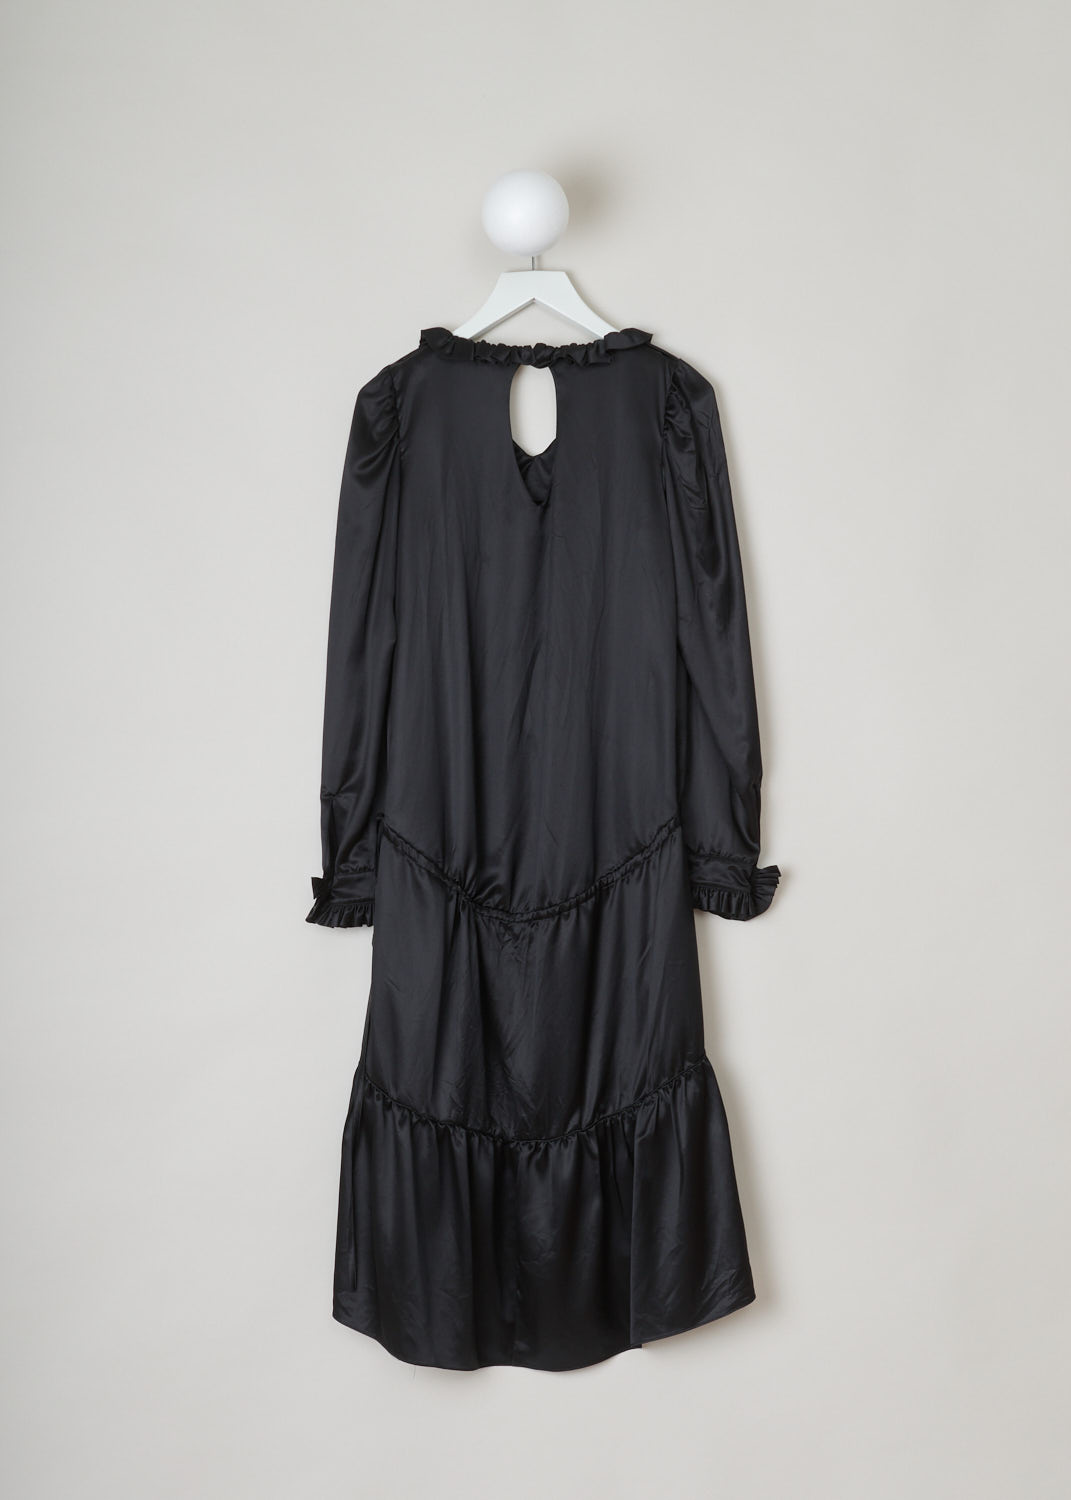 Balenciaga, Black ruffled dress, 494197_TXC02_1000, black, back. This all black dress has a ruffled neckline and cuffs which have a single button. A cord tunnel divides the skirt from the top. The closure option on this piece is the single button on the back.